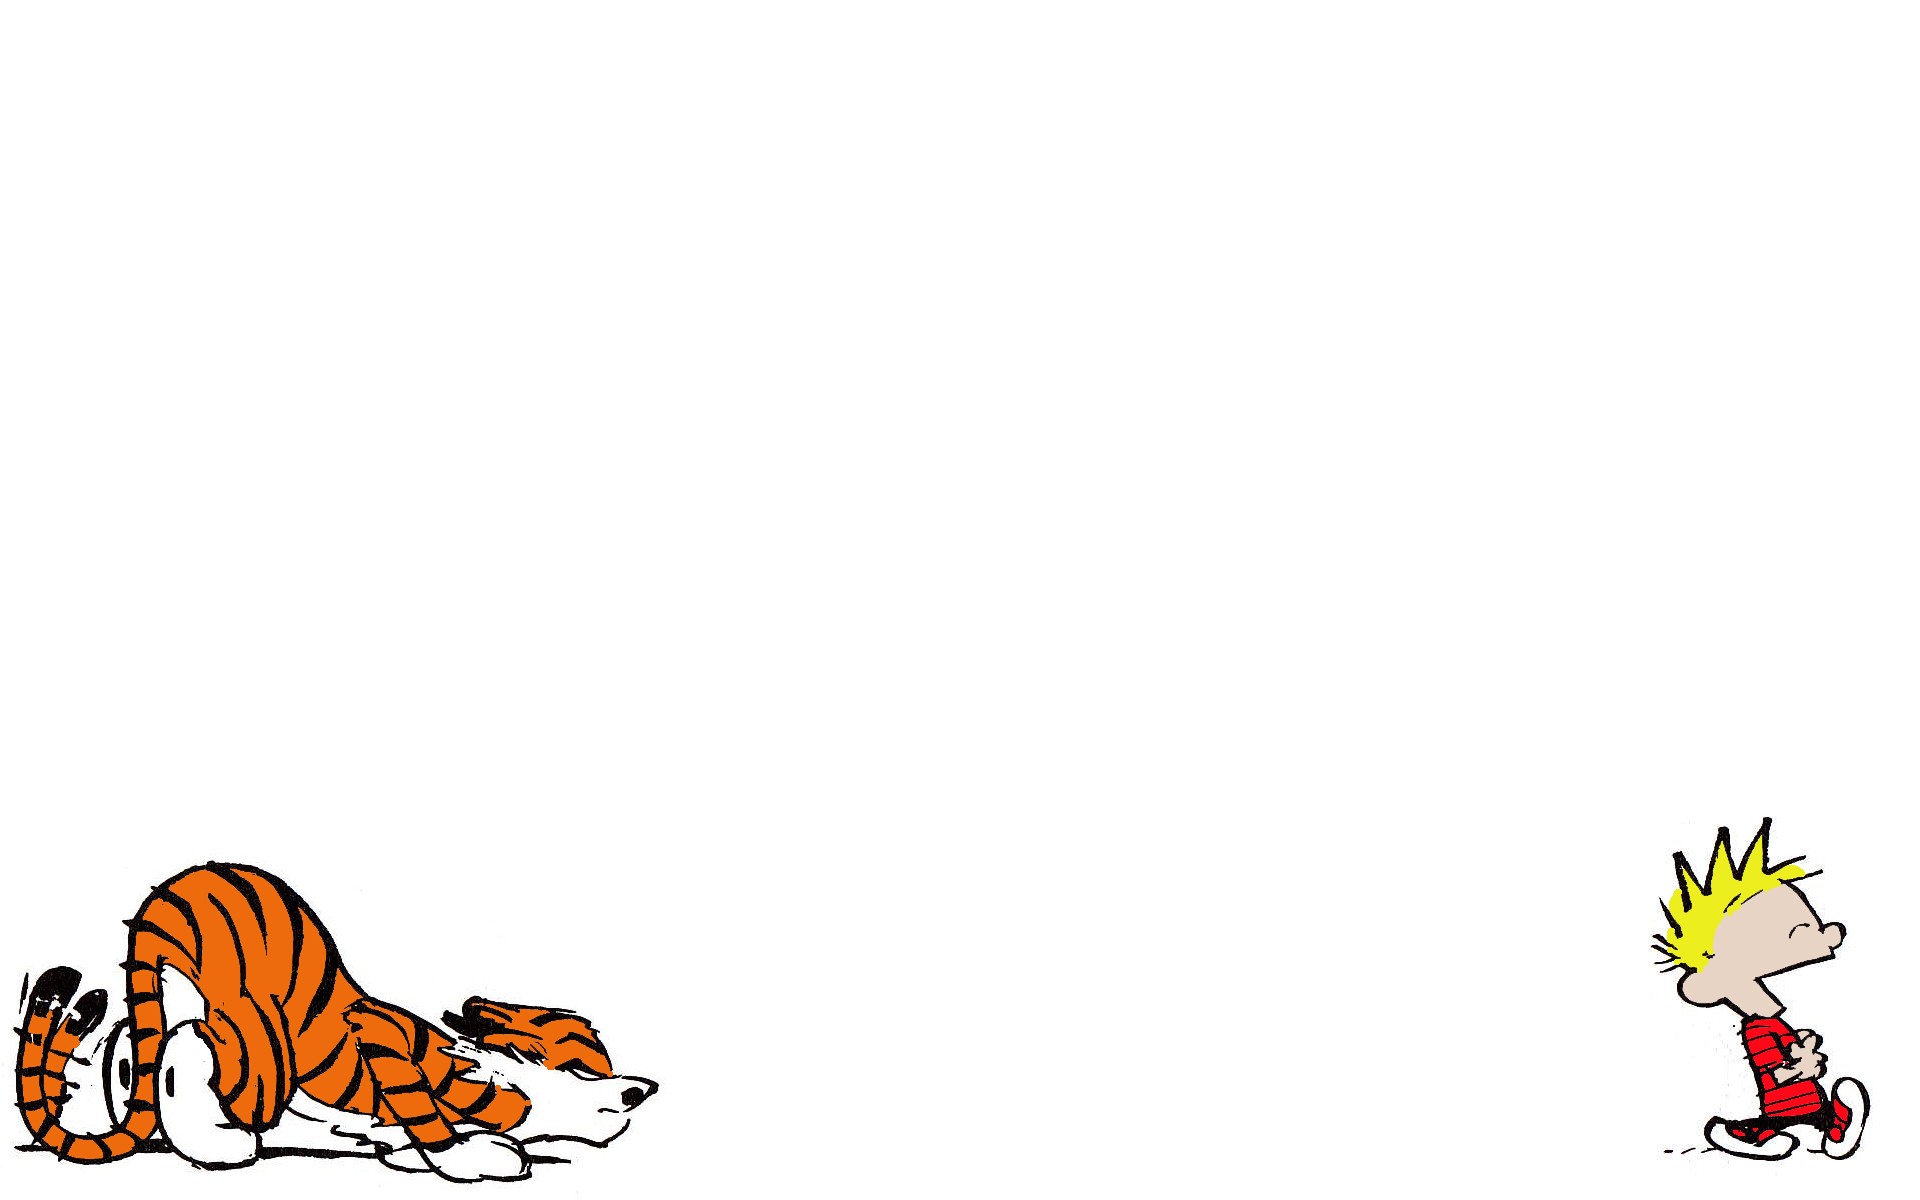 General 1920x1200 Calvin and Hobbes comics Bill Watterson cartoon simple background white background